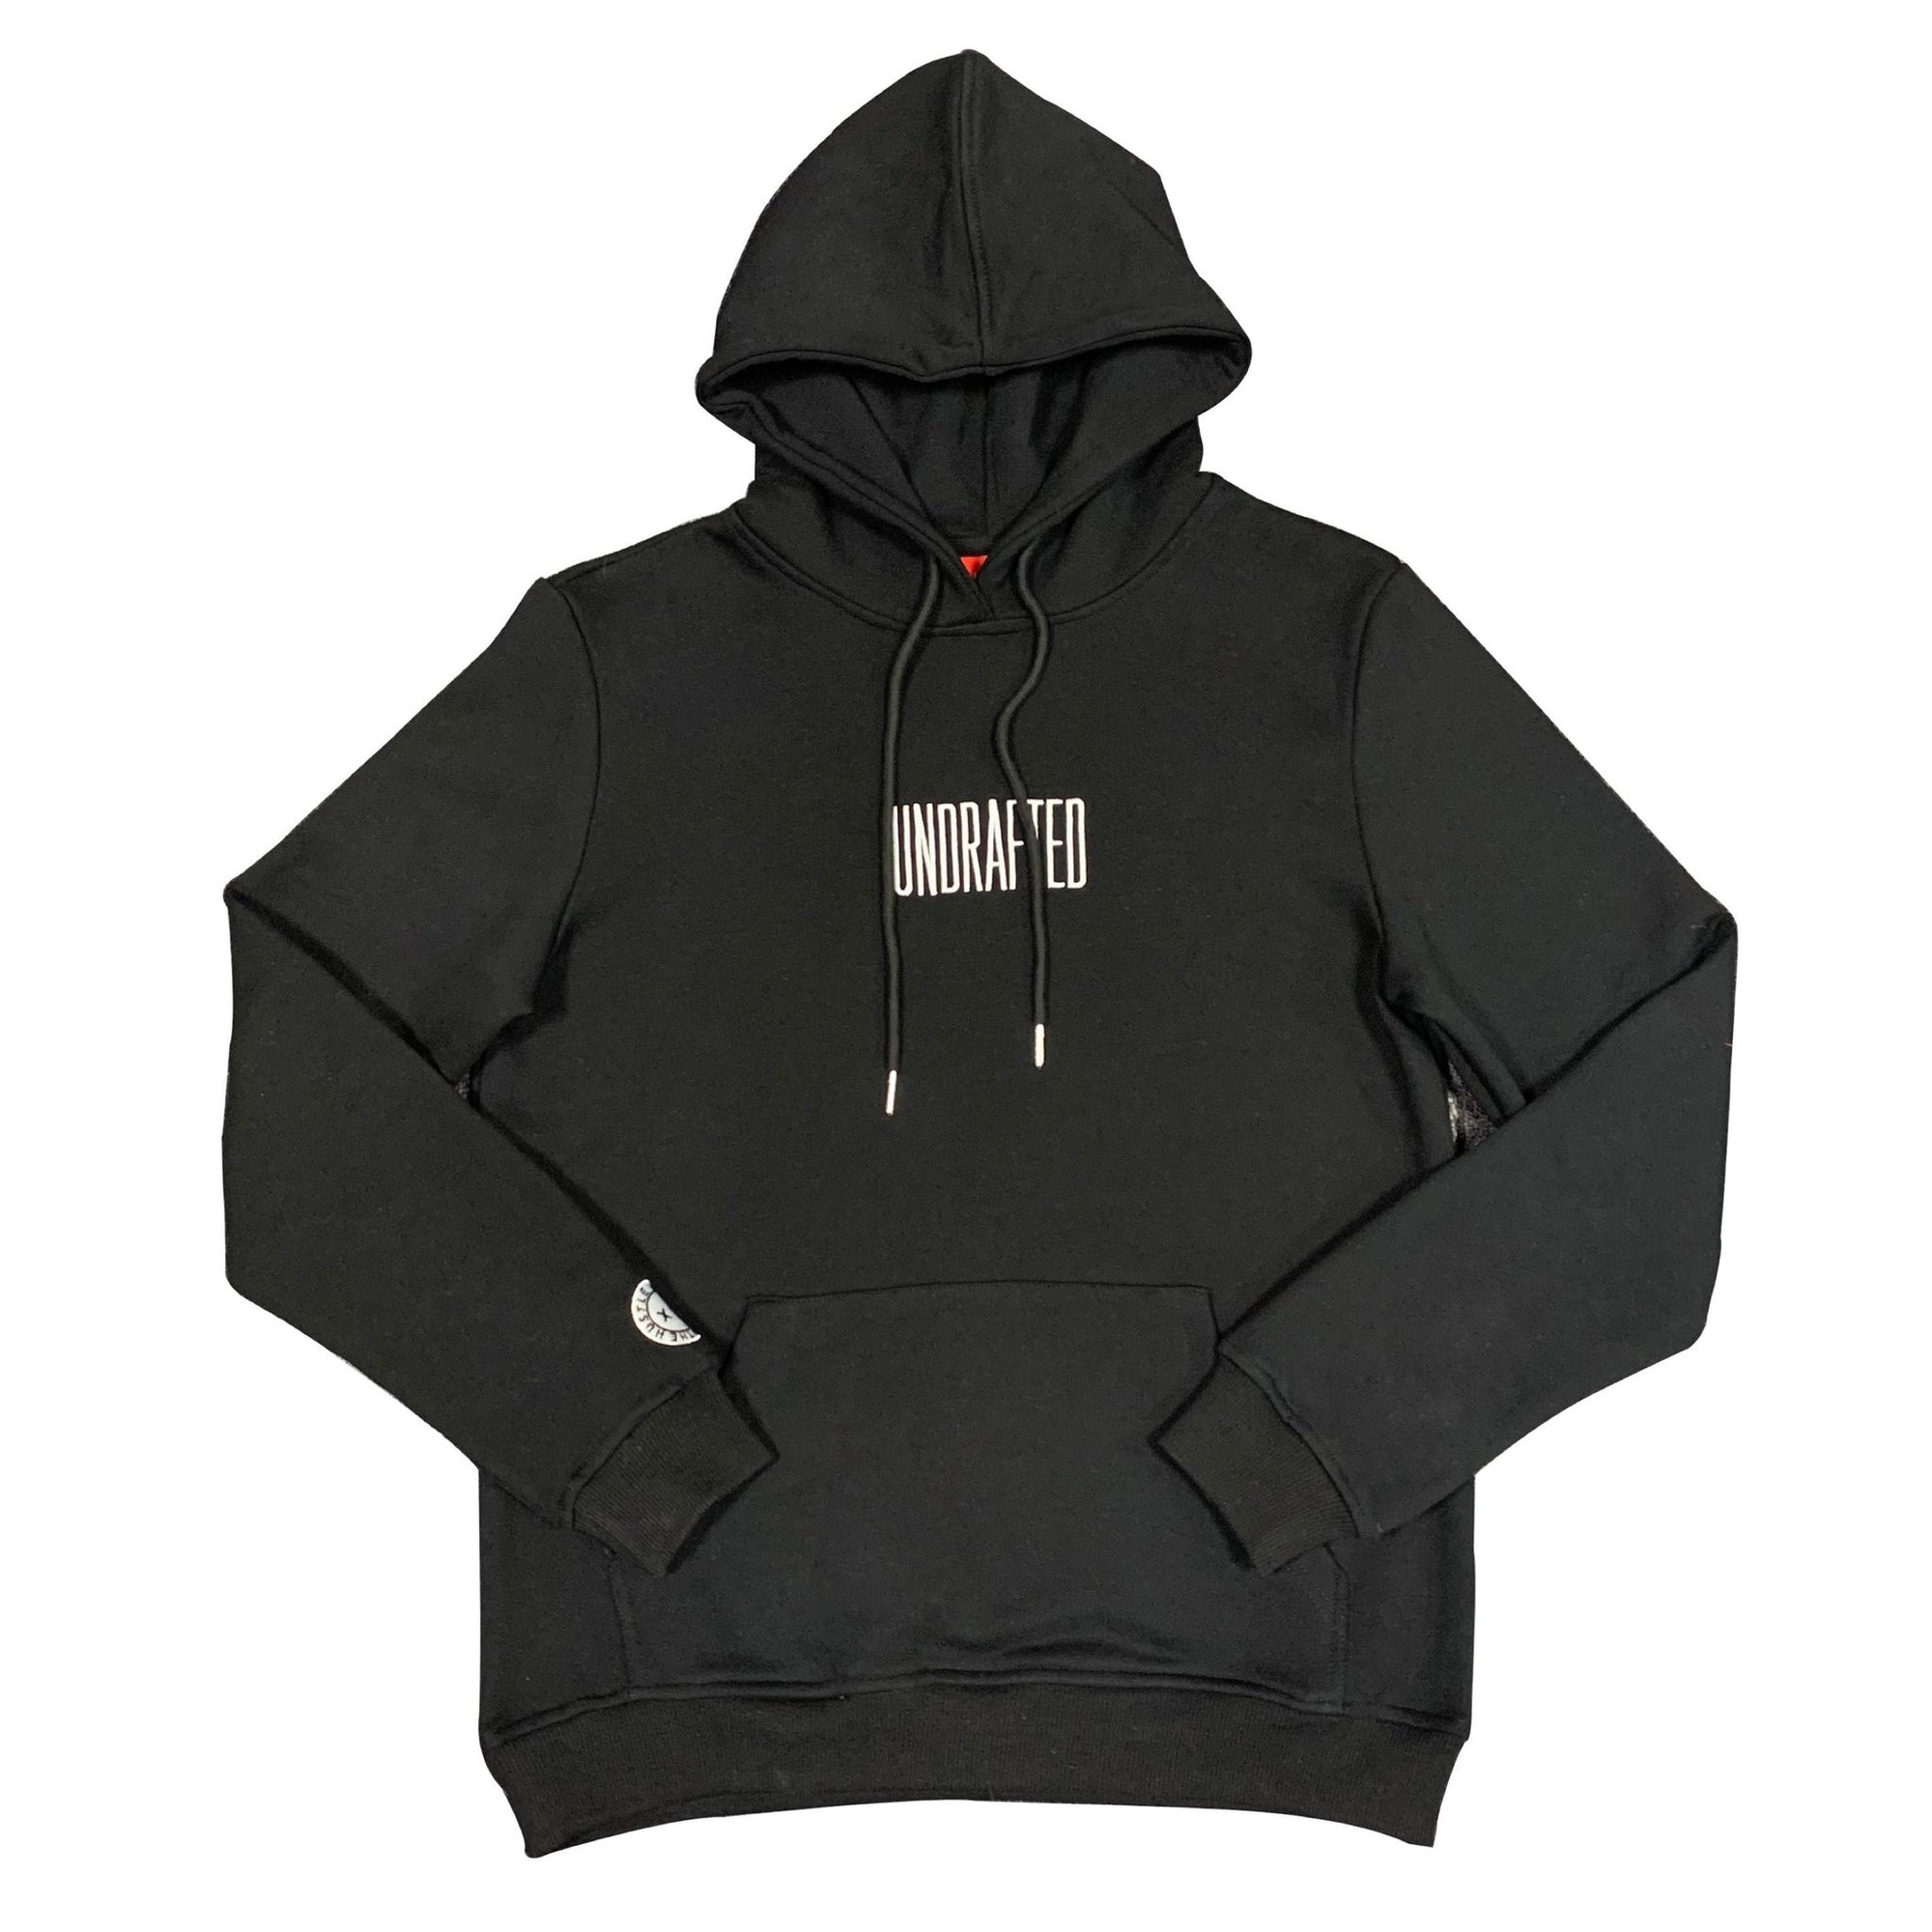 Undrafted Hoodie Black/White